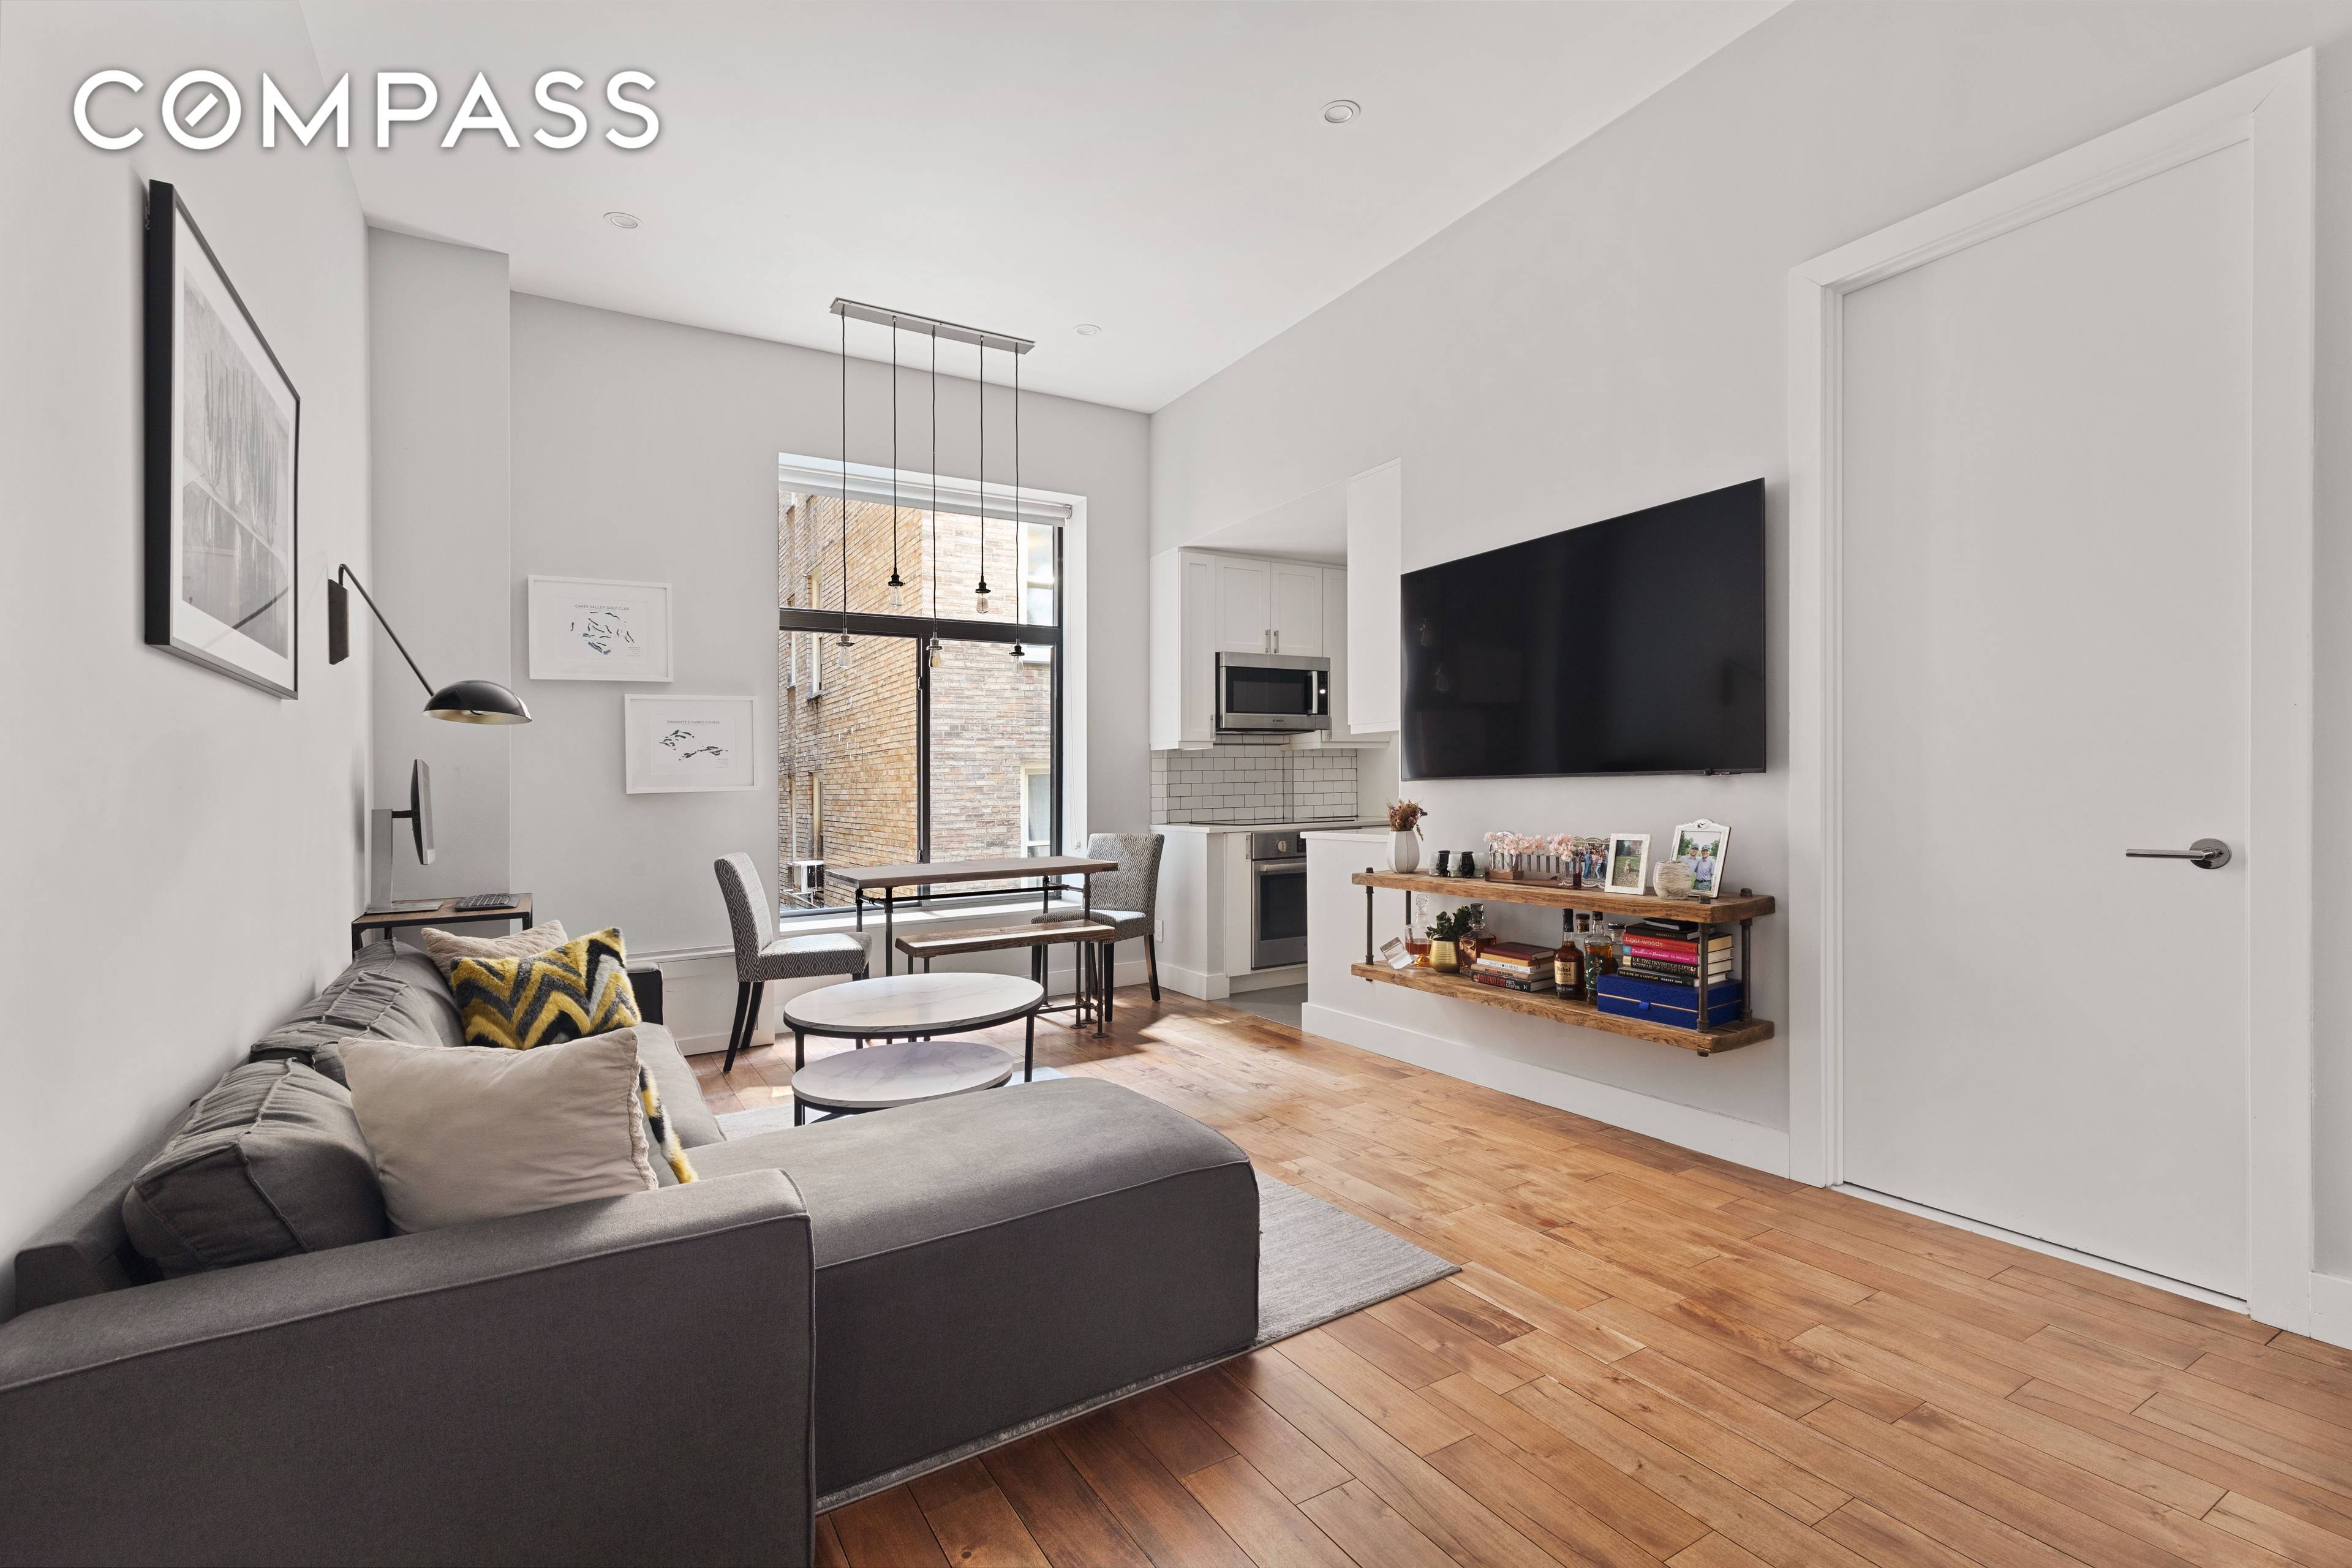 11 Foot ceilings, exposed brick walls, and over sized windows immediately command your attention as you enter this immaculate apartment.